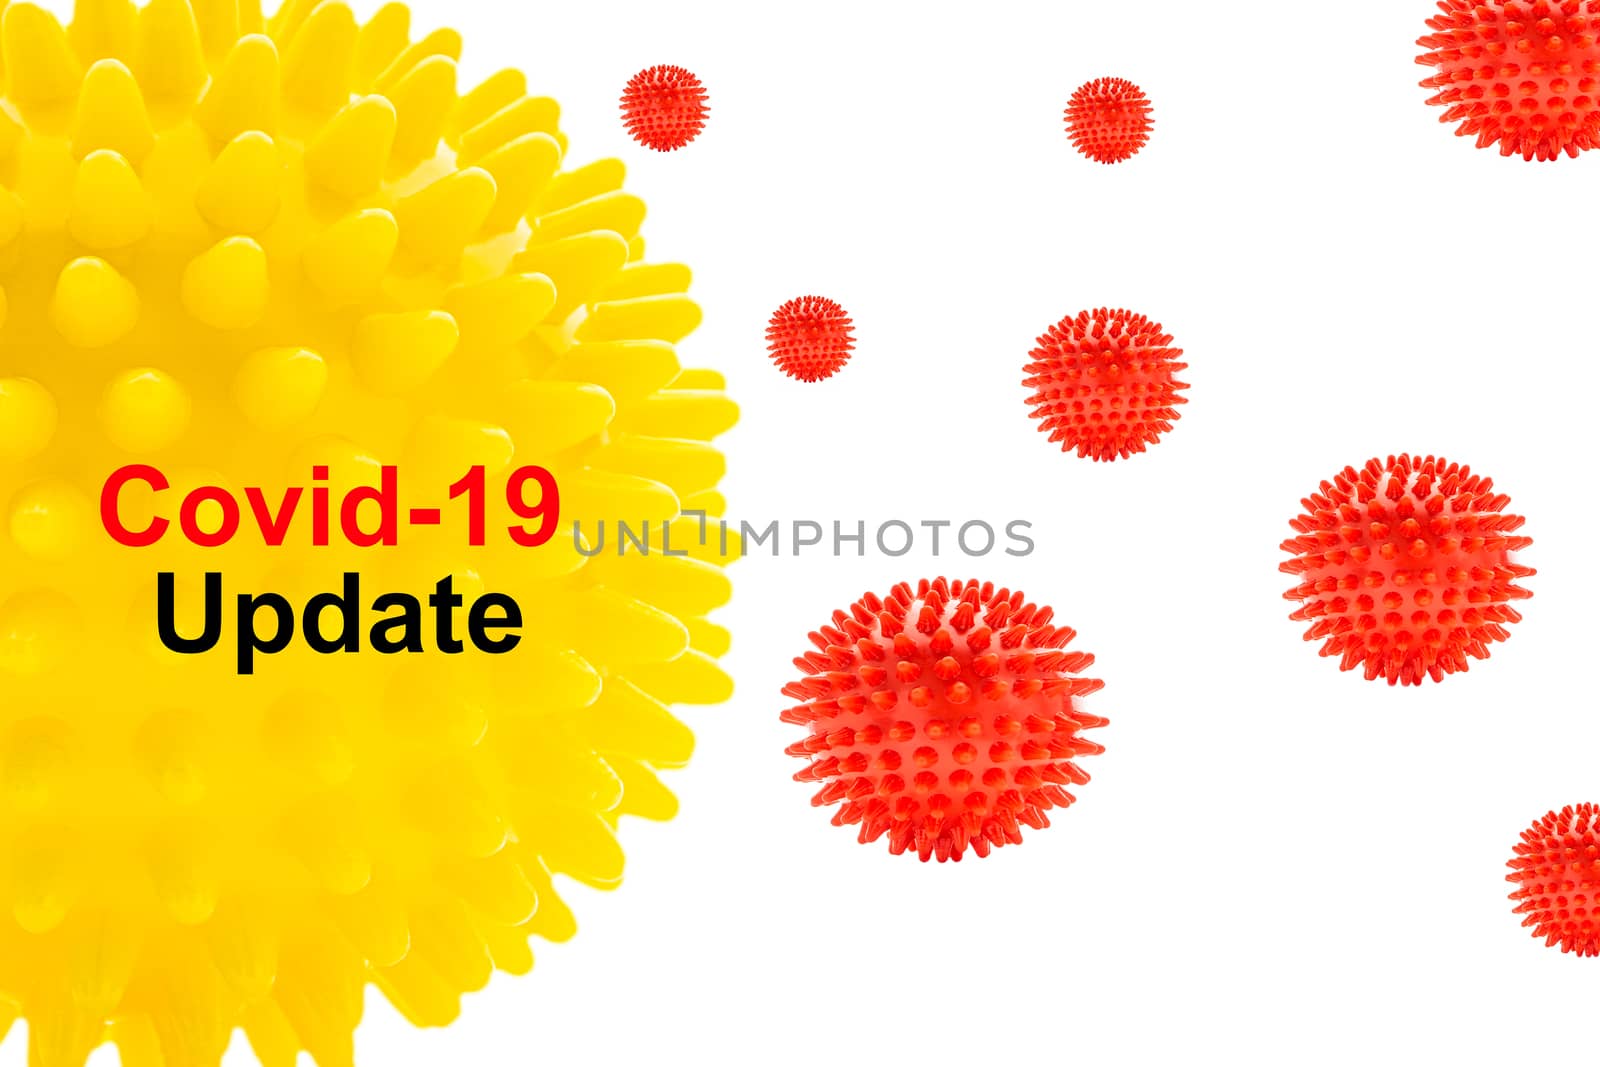 COVID-19 UPDATE text on white background. Covid-19 or Coronavirus by silverwings